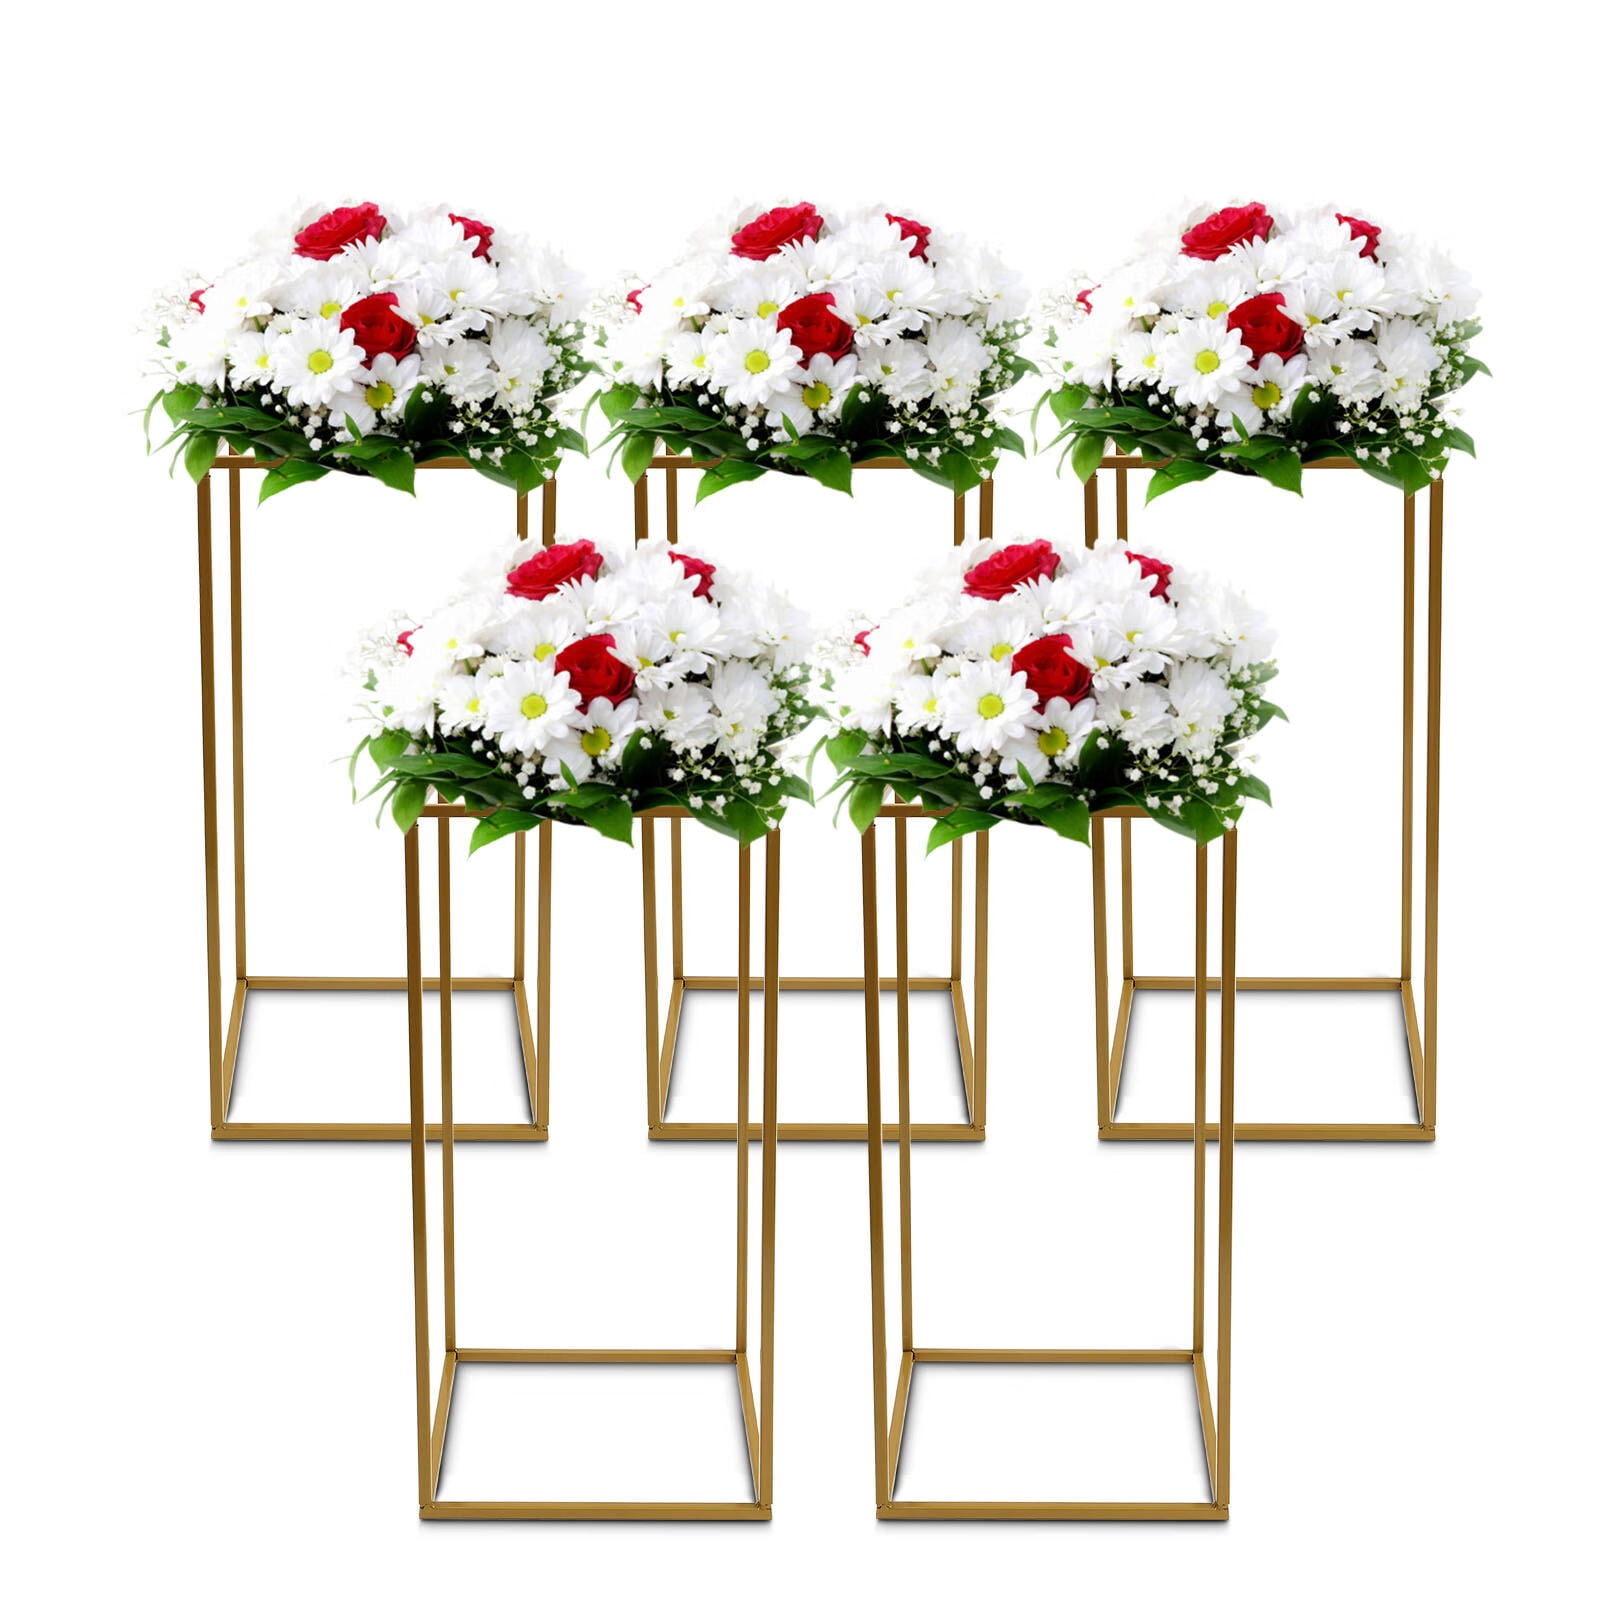 Hot Selling Wedding Decoration Table Centerpieces Iron Black Metal Pillar  Vintage Flower Stand Holders Senyu1956 - Party & Holiday Diy Decorations -  AliExpress